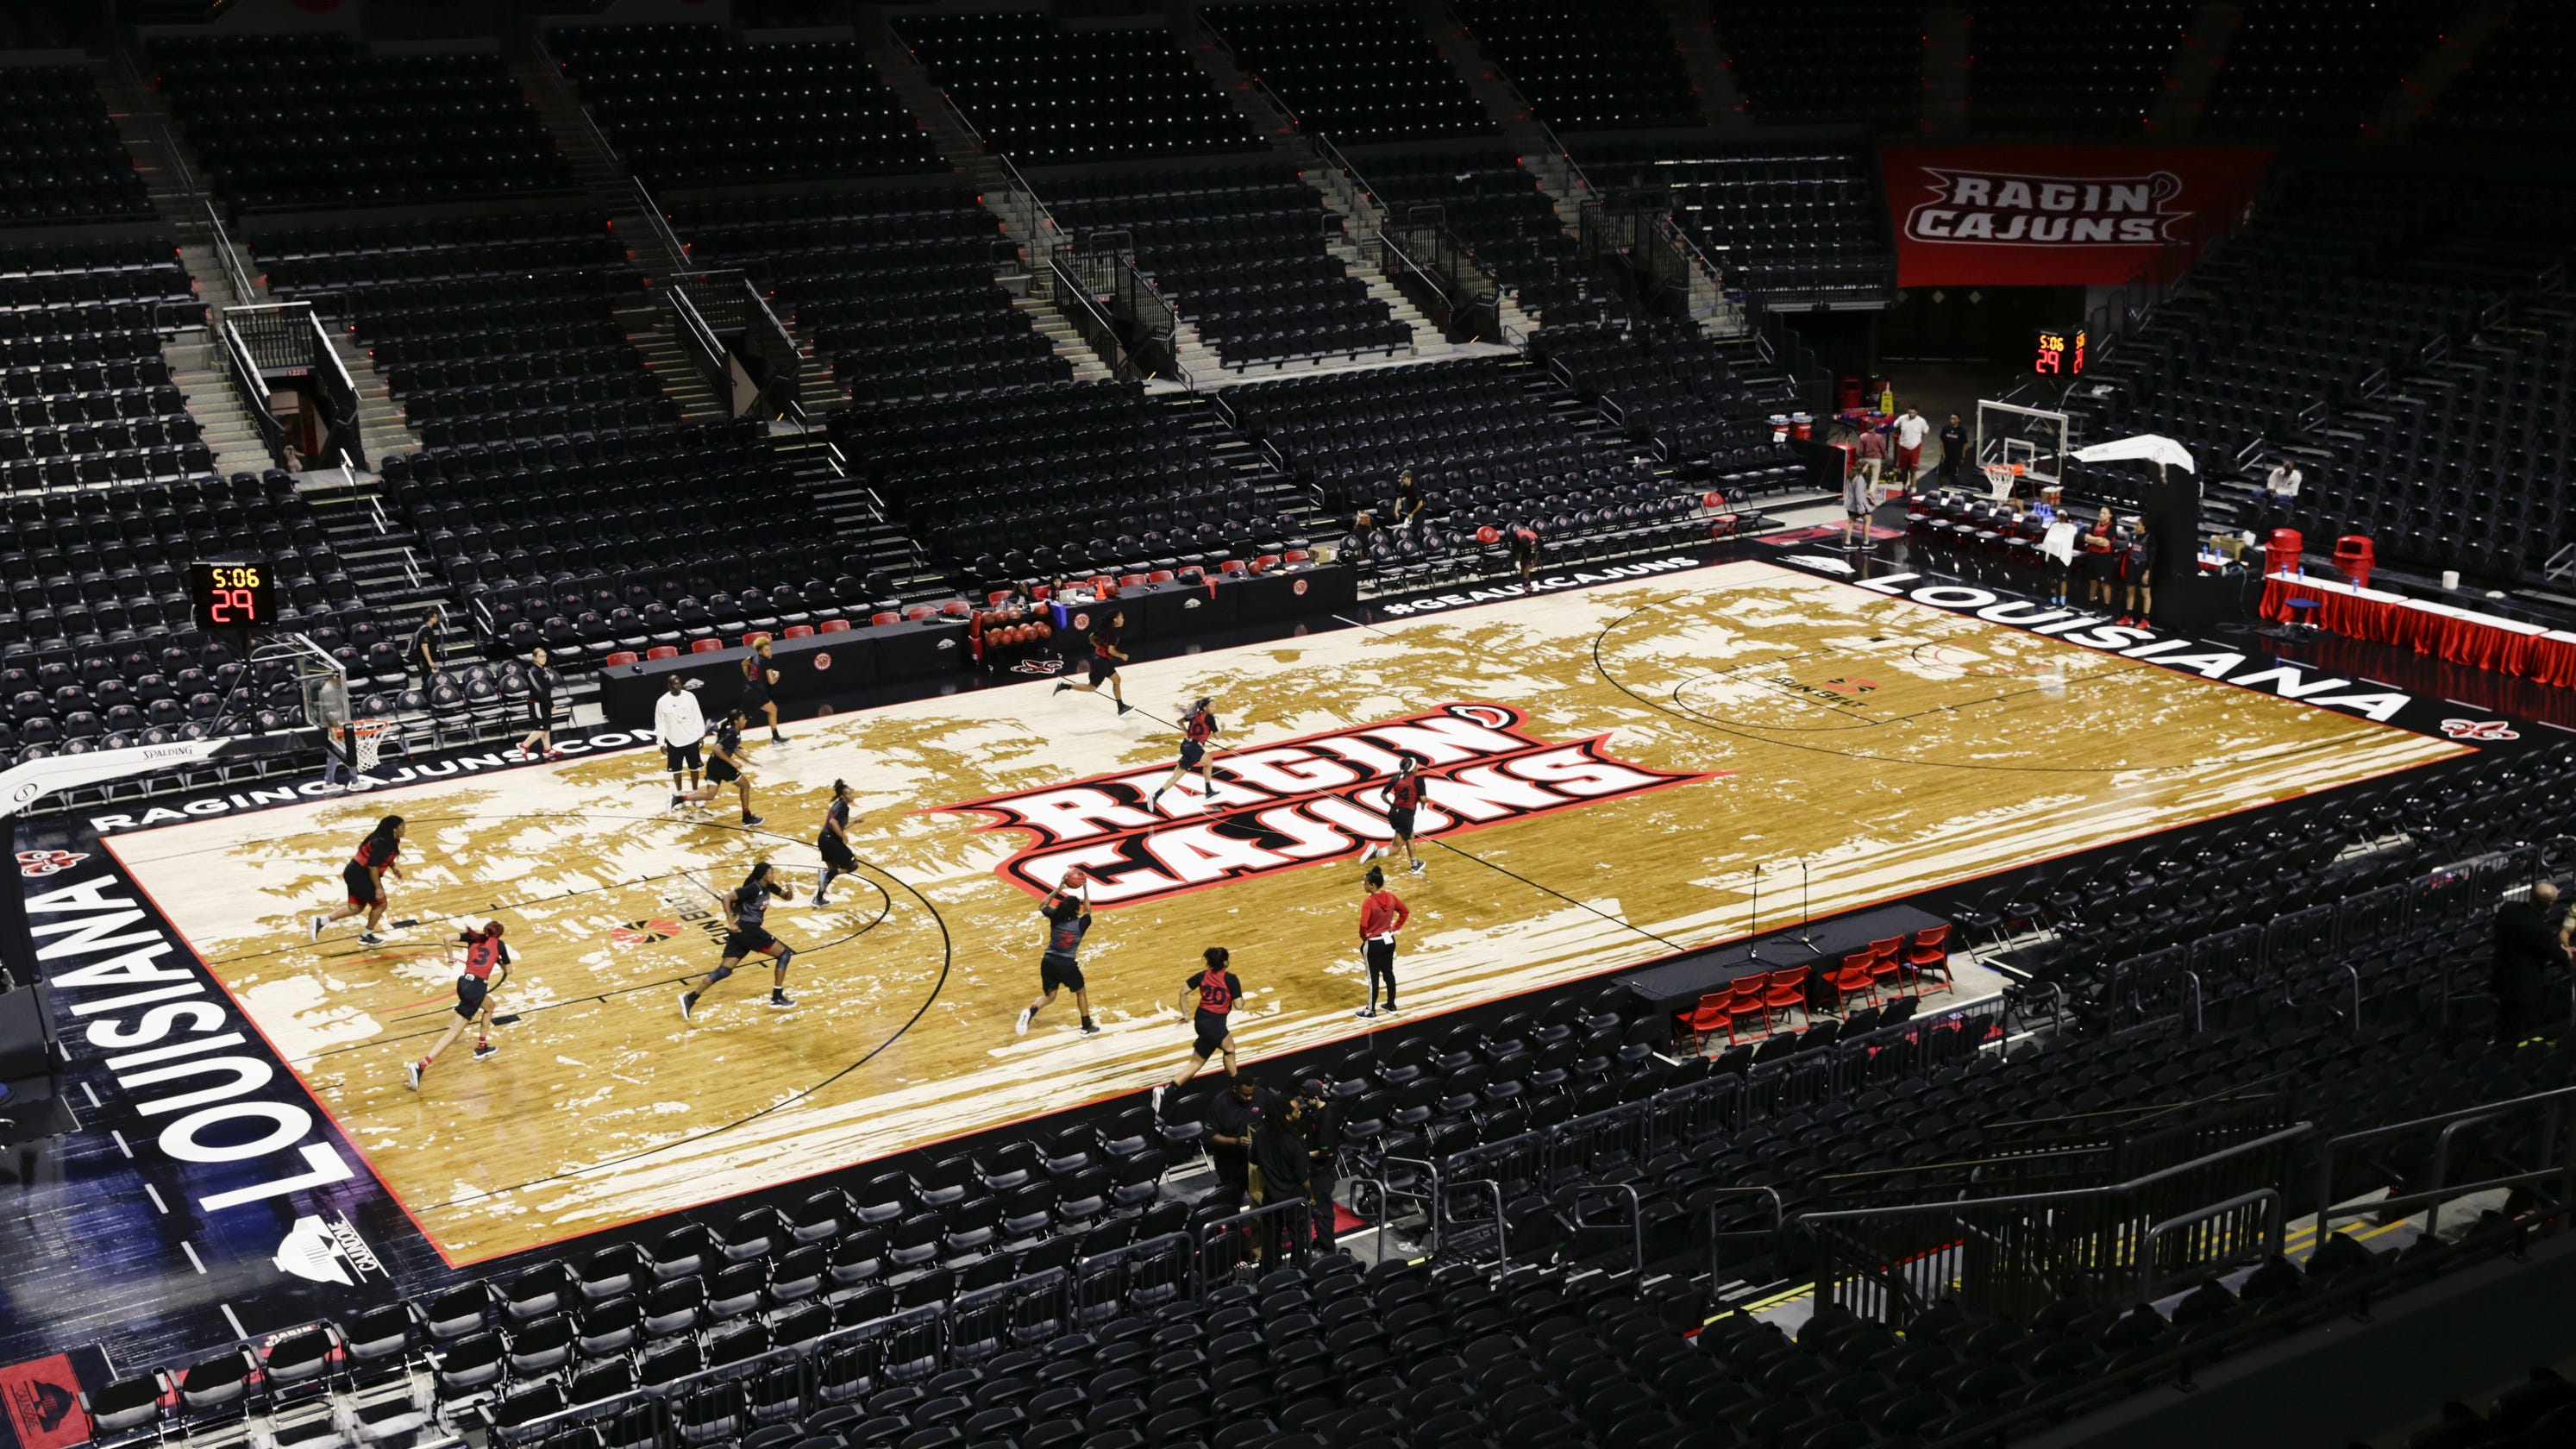 Ul Basketball Cajundome Floor Will Have New Look The Swamp Is Out